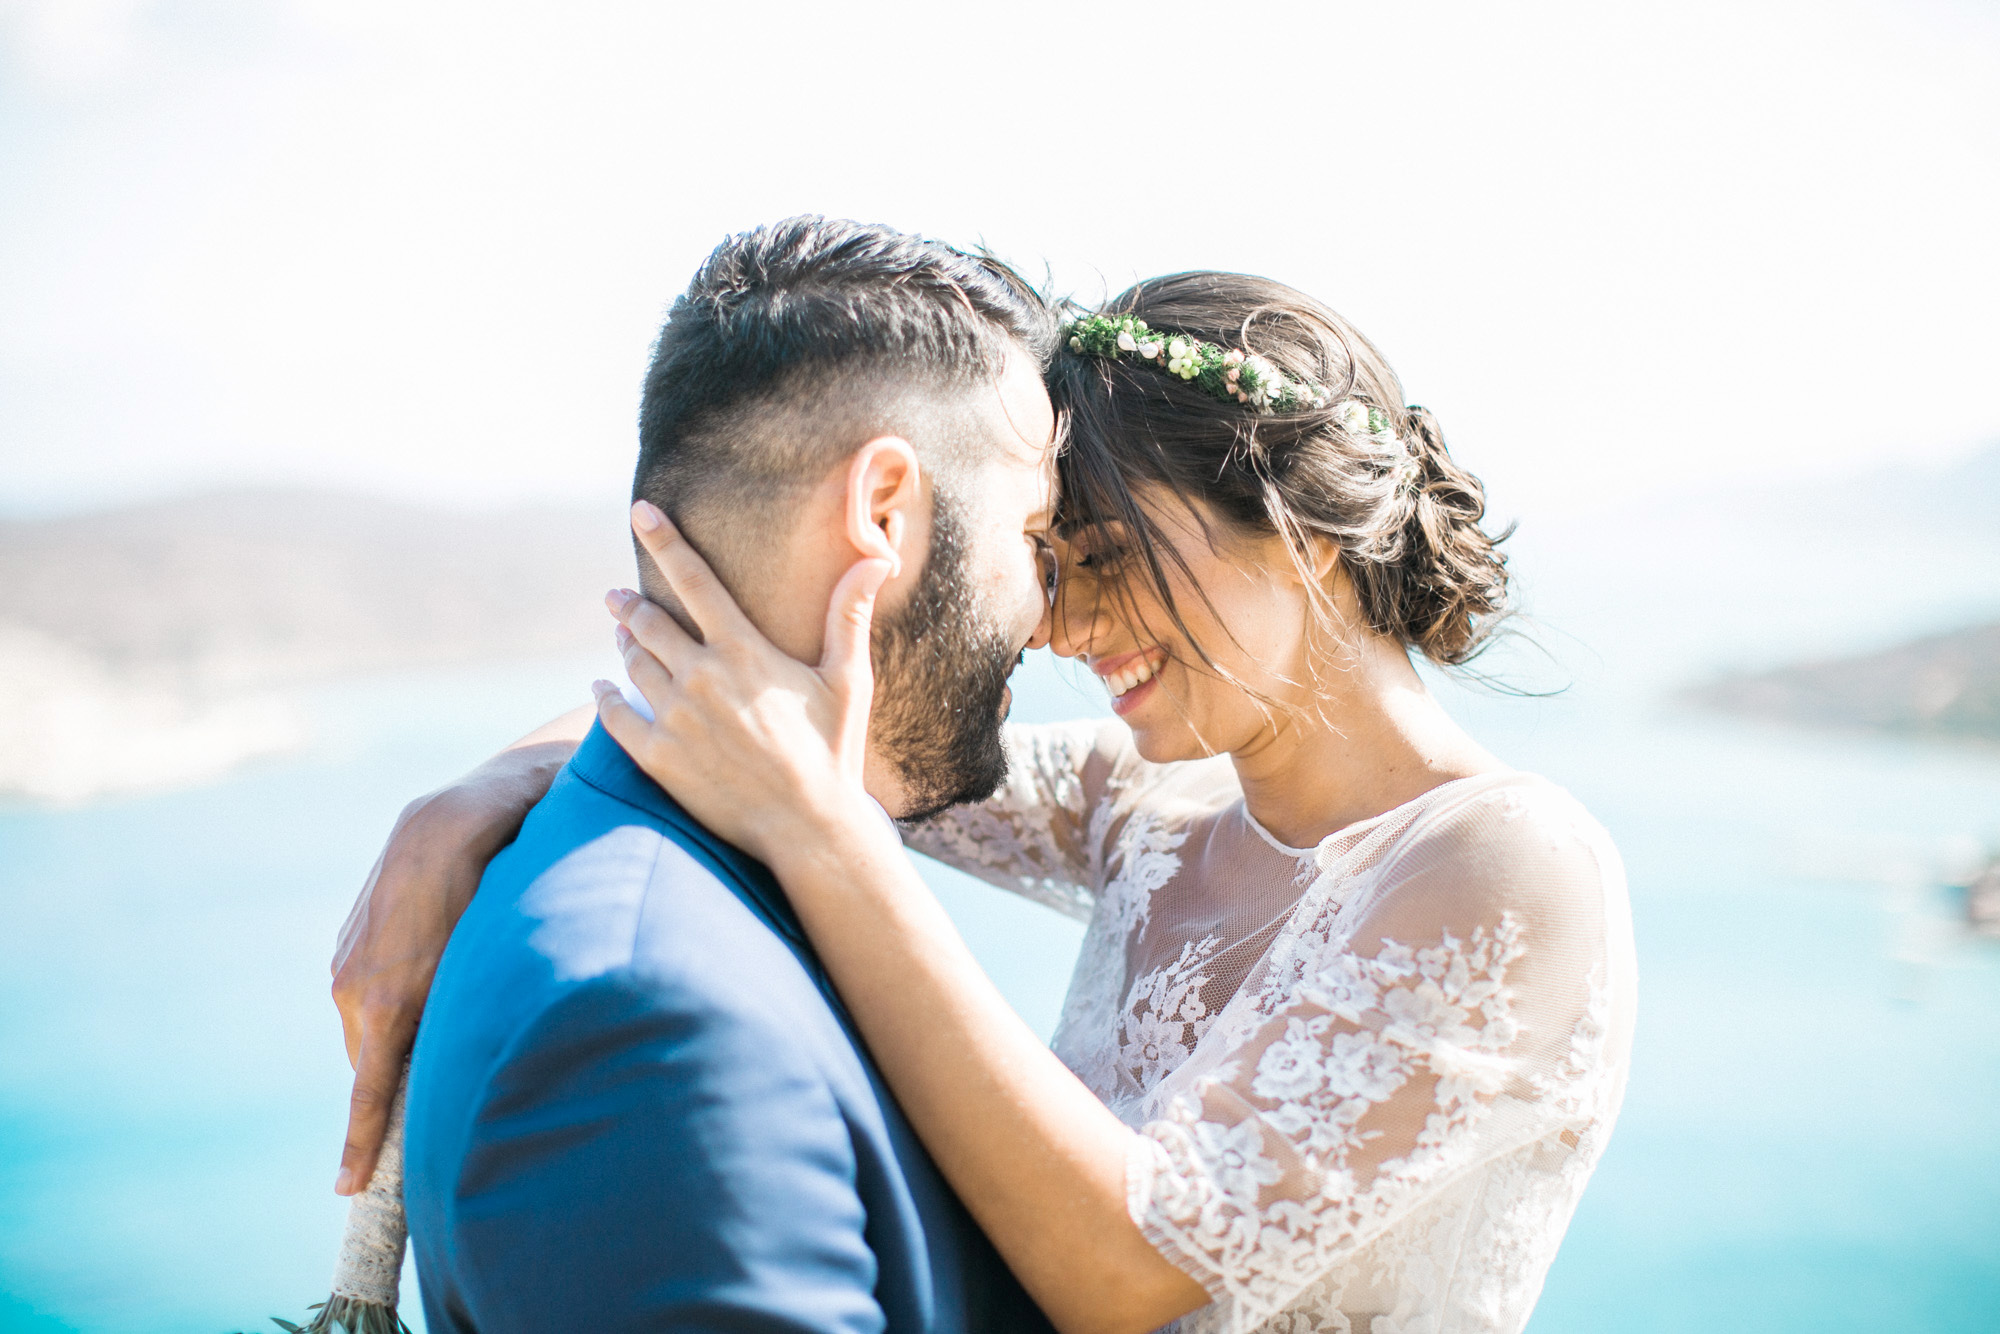 Professional wedding photosession in Crete, closeup portrait of bride and groom posing with Spinalonga island and sea view in the background.